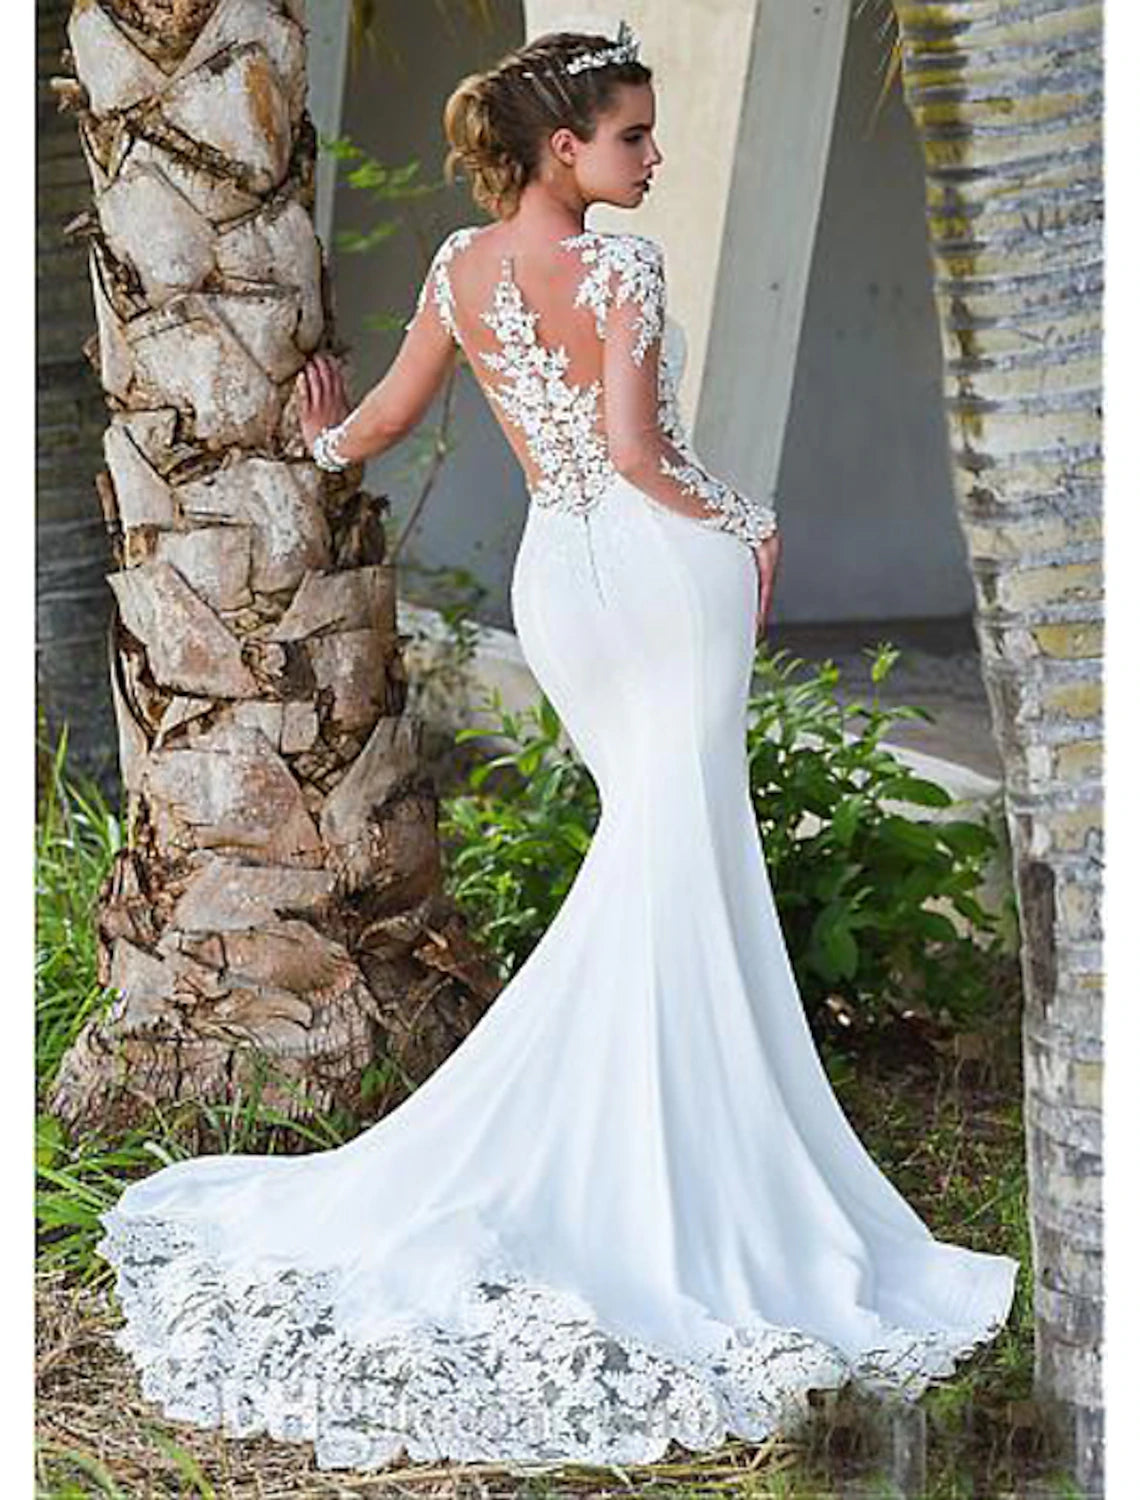 Engagement Open Back Formal Fall Wedding Dresses Mermaid / Trumpet Illusion Neck Long Sleeve Court Train Lace Bridal Gowns With Appliques Summer Wedding Party